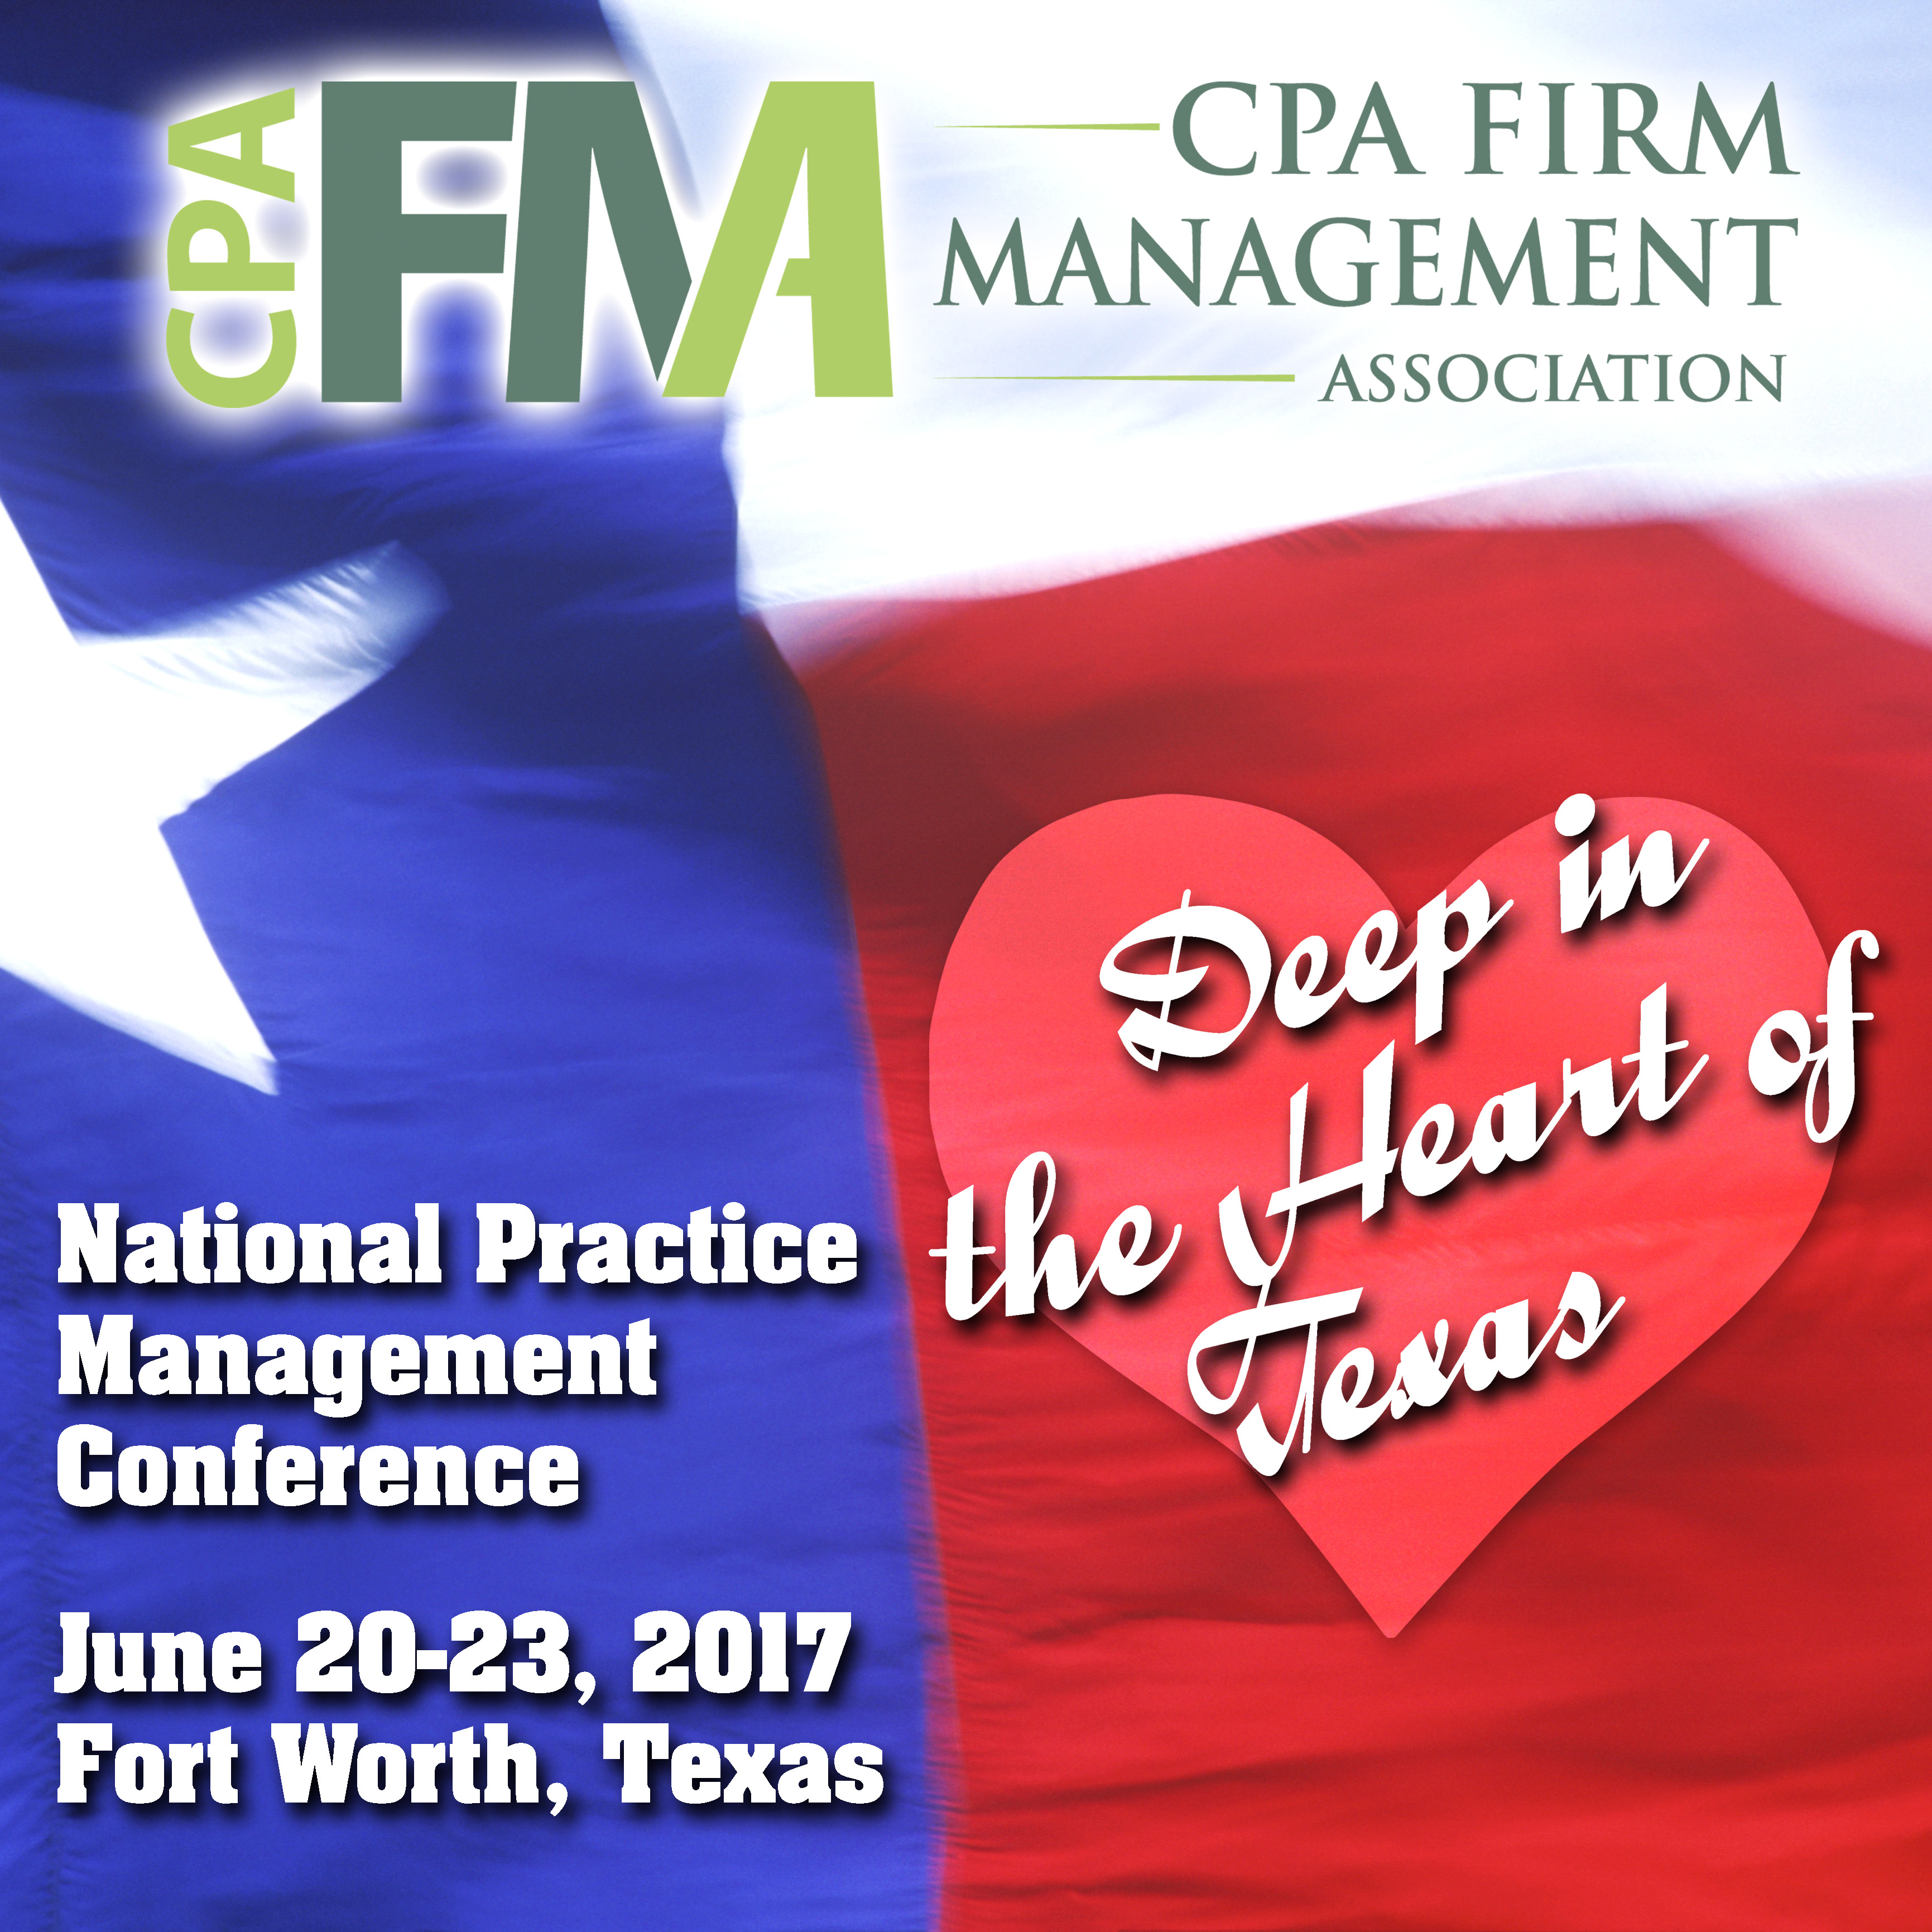 Are You Going to Join Me at the National Practice Management Conference?